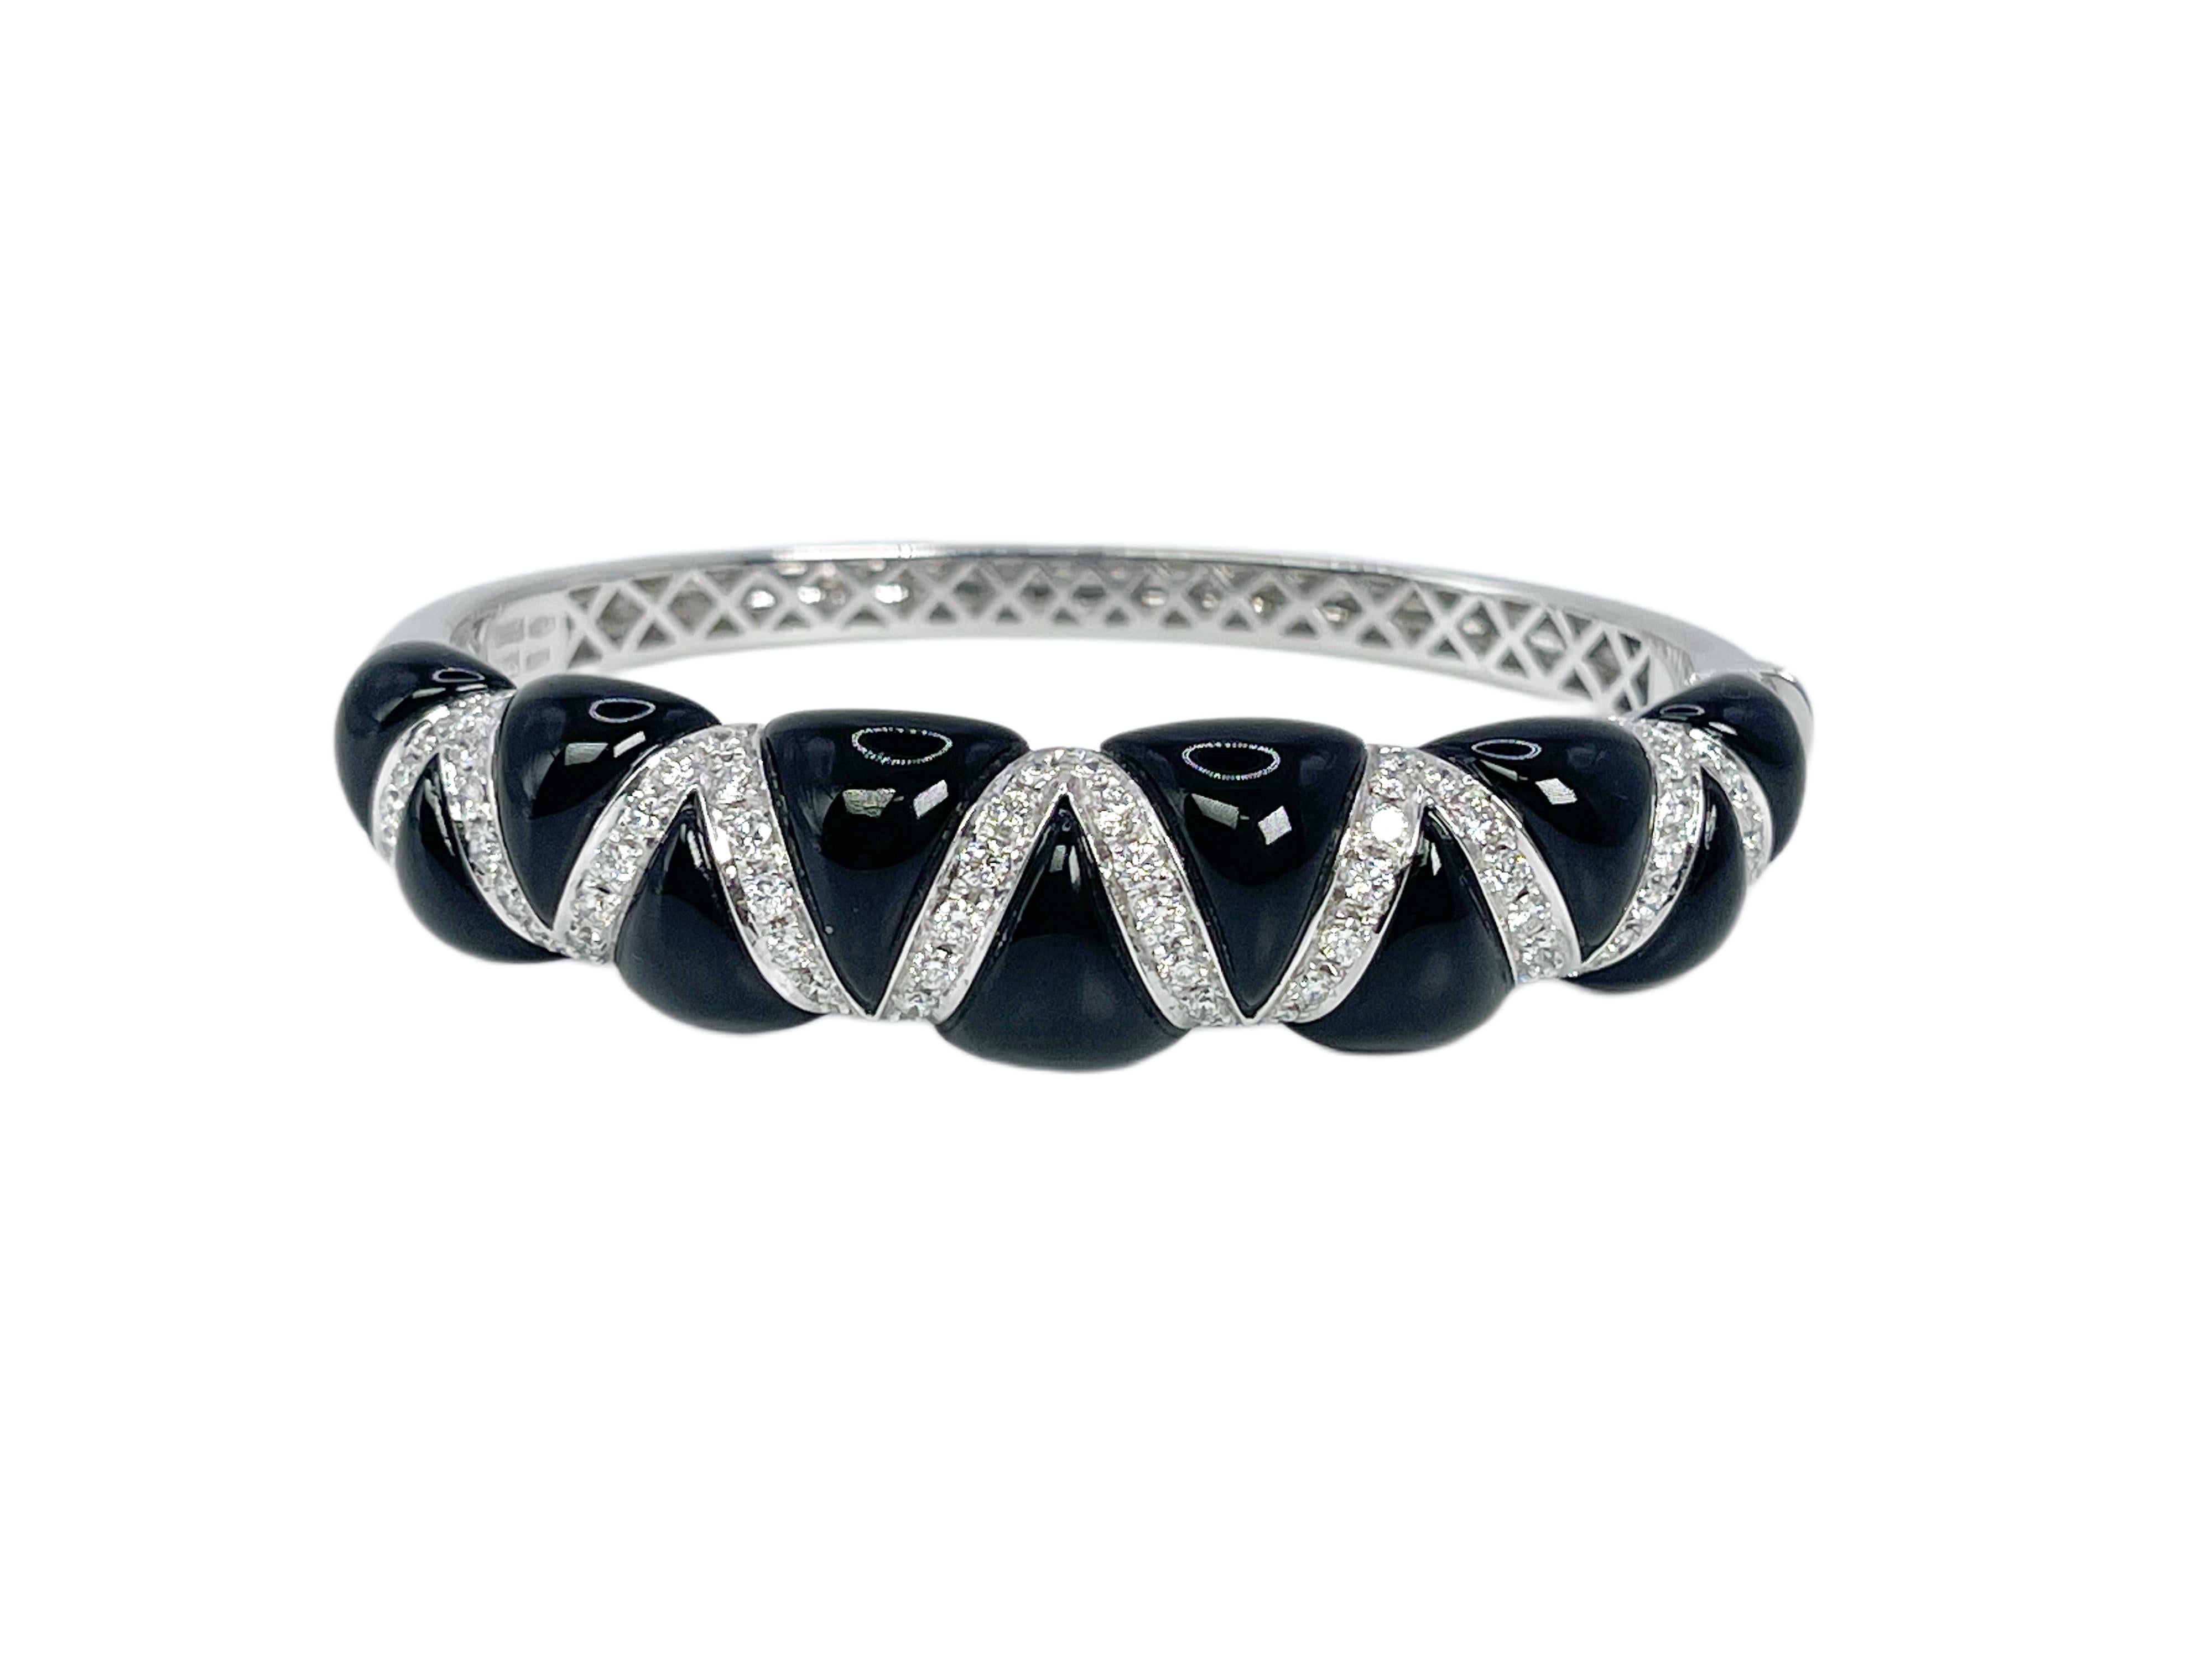 
Important onyx & diamond bangle bracelet made with custom cut onyx pieces and VS diamonds. The piece is finished in 18KT white gold by the designer Chantecler.

GRAM WEIGHT: 40.82gr
GOLD: 18KT white gold

NATURAL DIAMOND(S)
Cut: Round